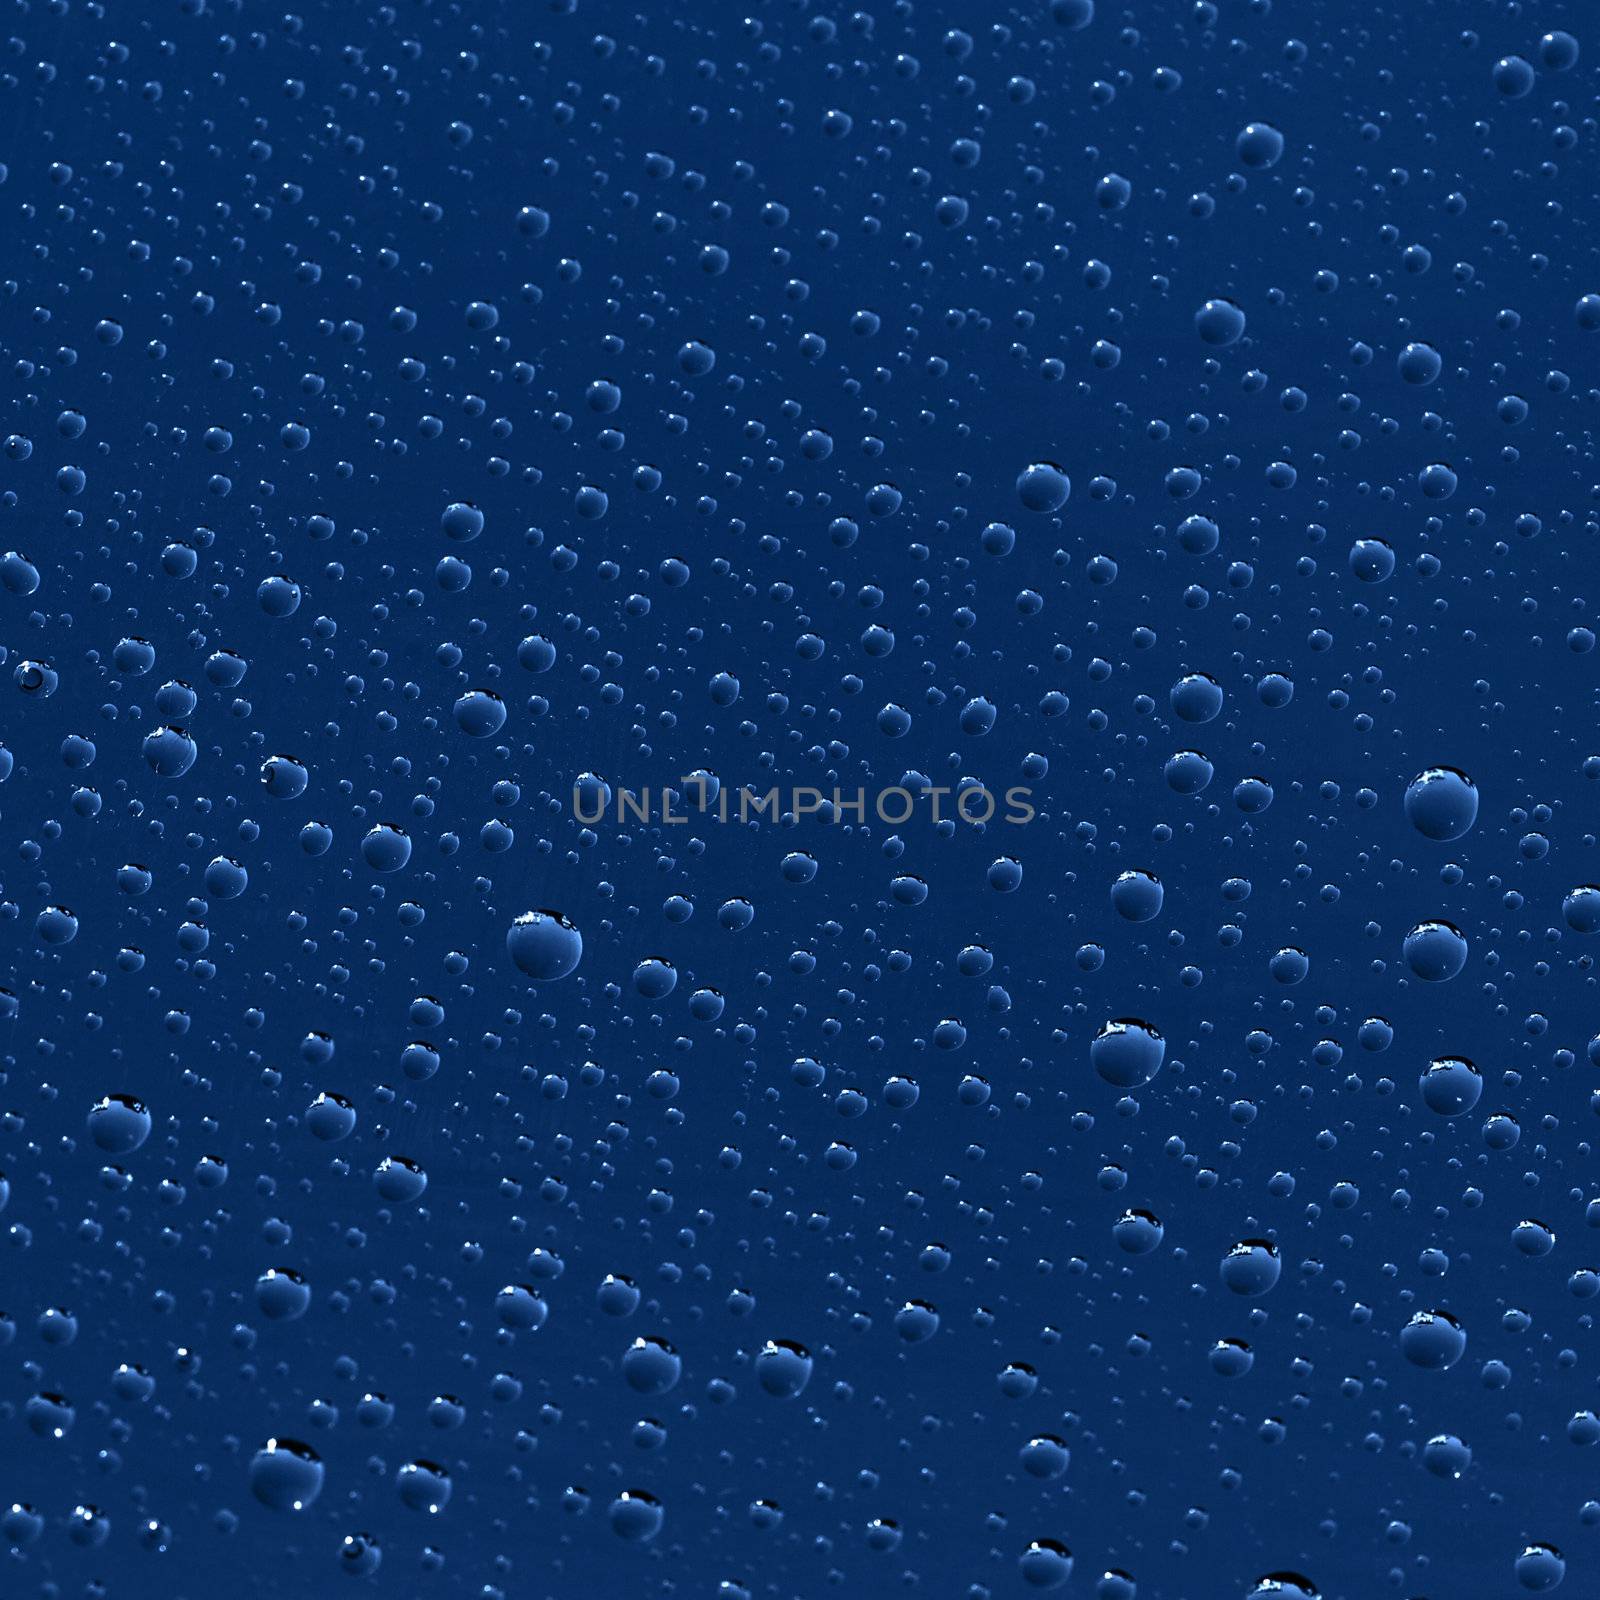 Texture - water drops on blue by pzaxe